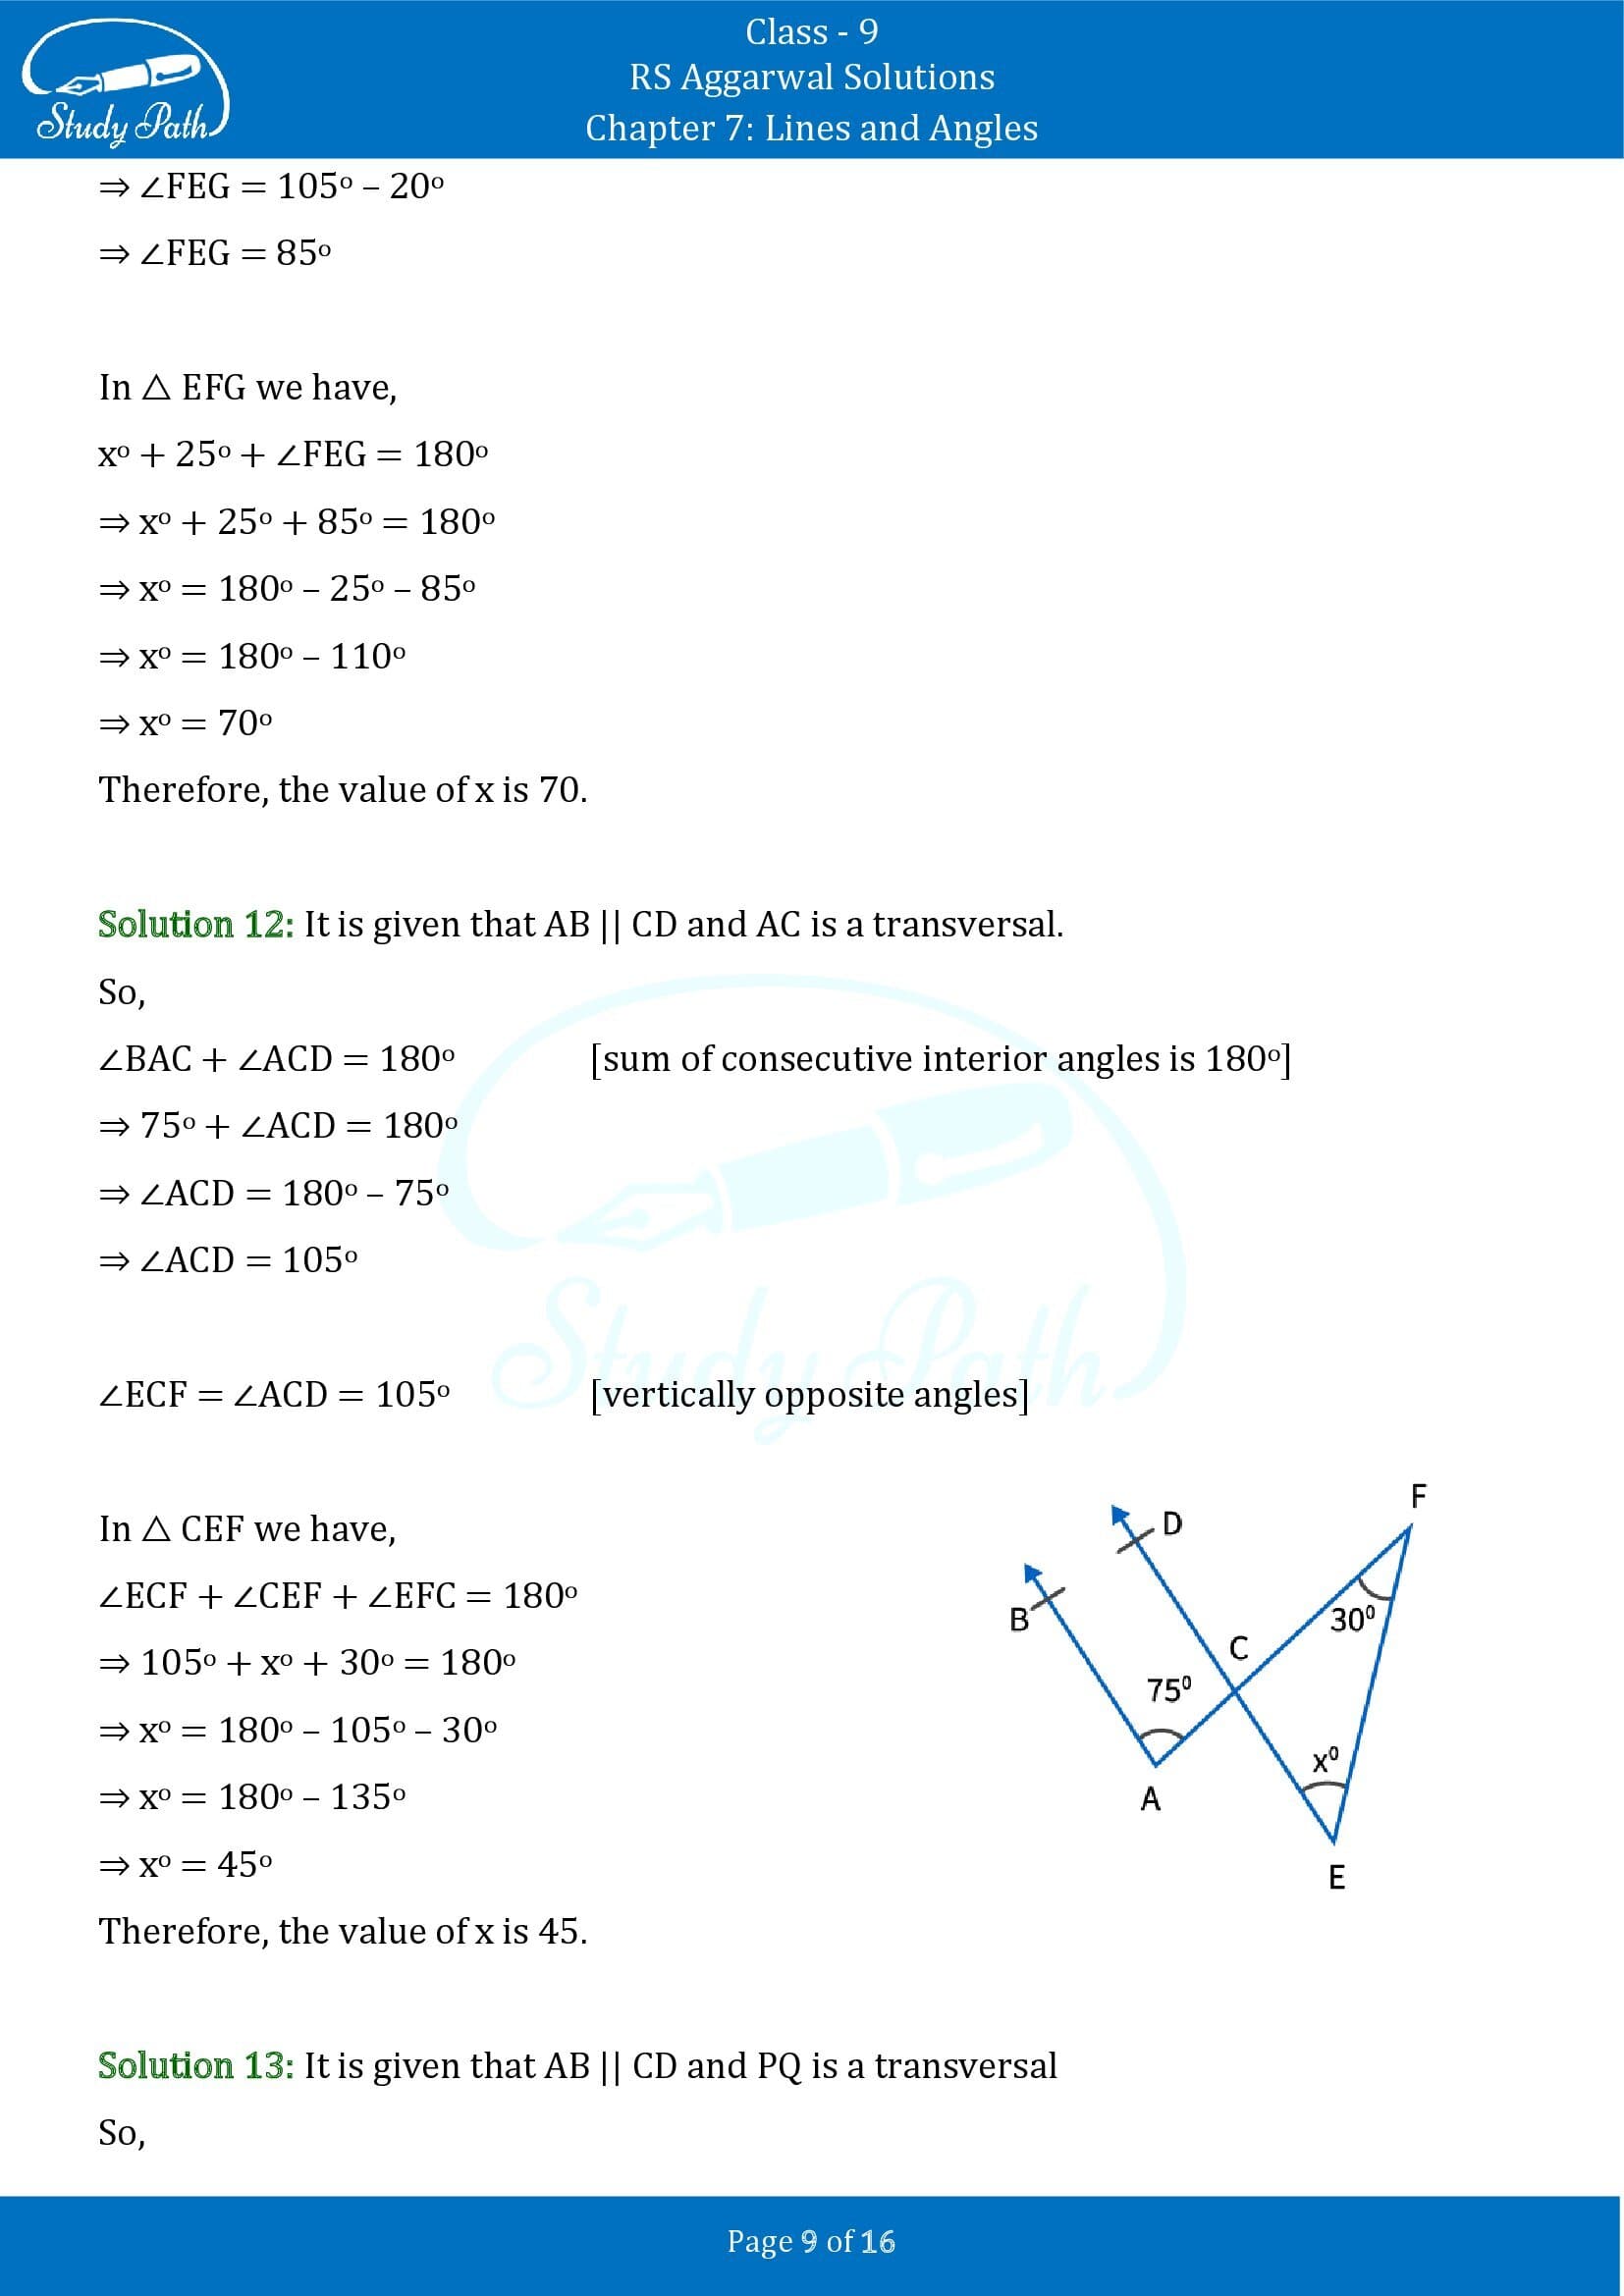 RS Aggarwal Solutions Class 9 Chapter 7 Lines and Angles Exercise 7C 00009